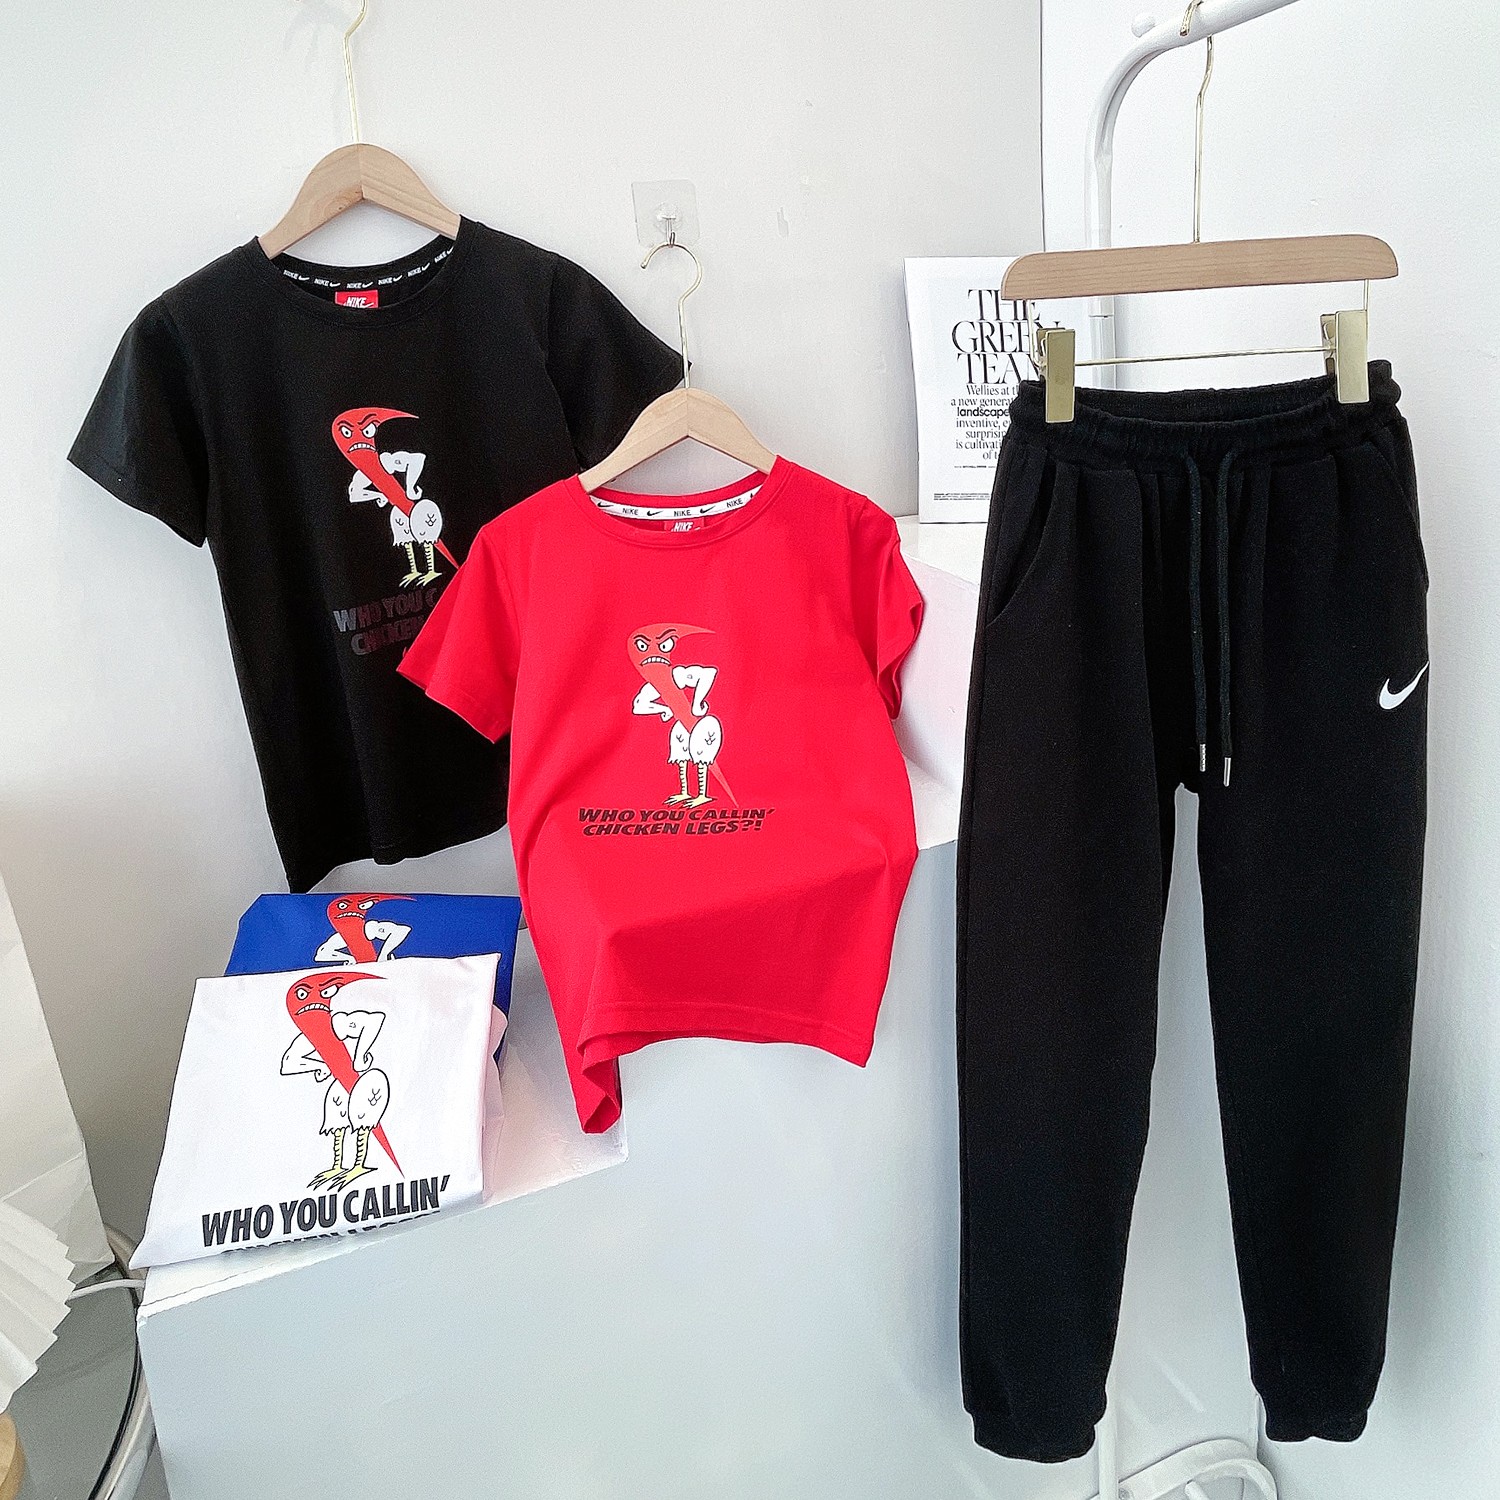 Nike Clothing Pants & Trousers T-Shirt Black Blue Red White Printing Kids Cotton Spring/Summer Collection Short Sleeve